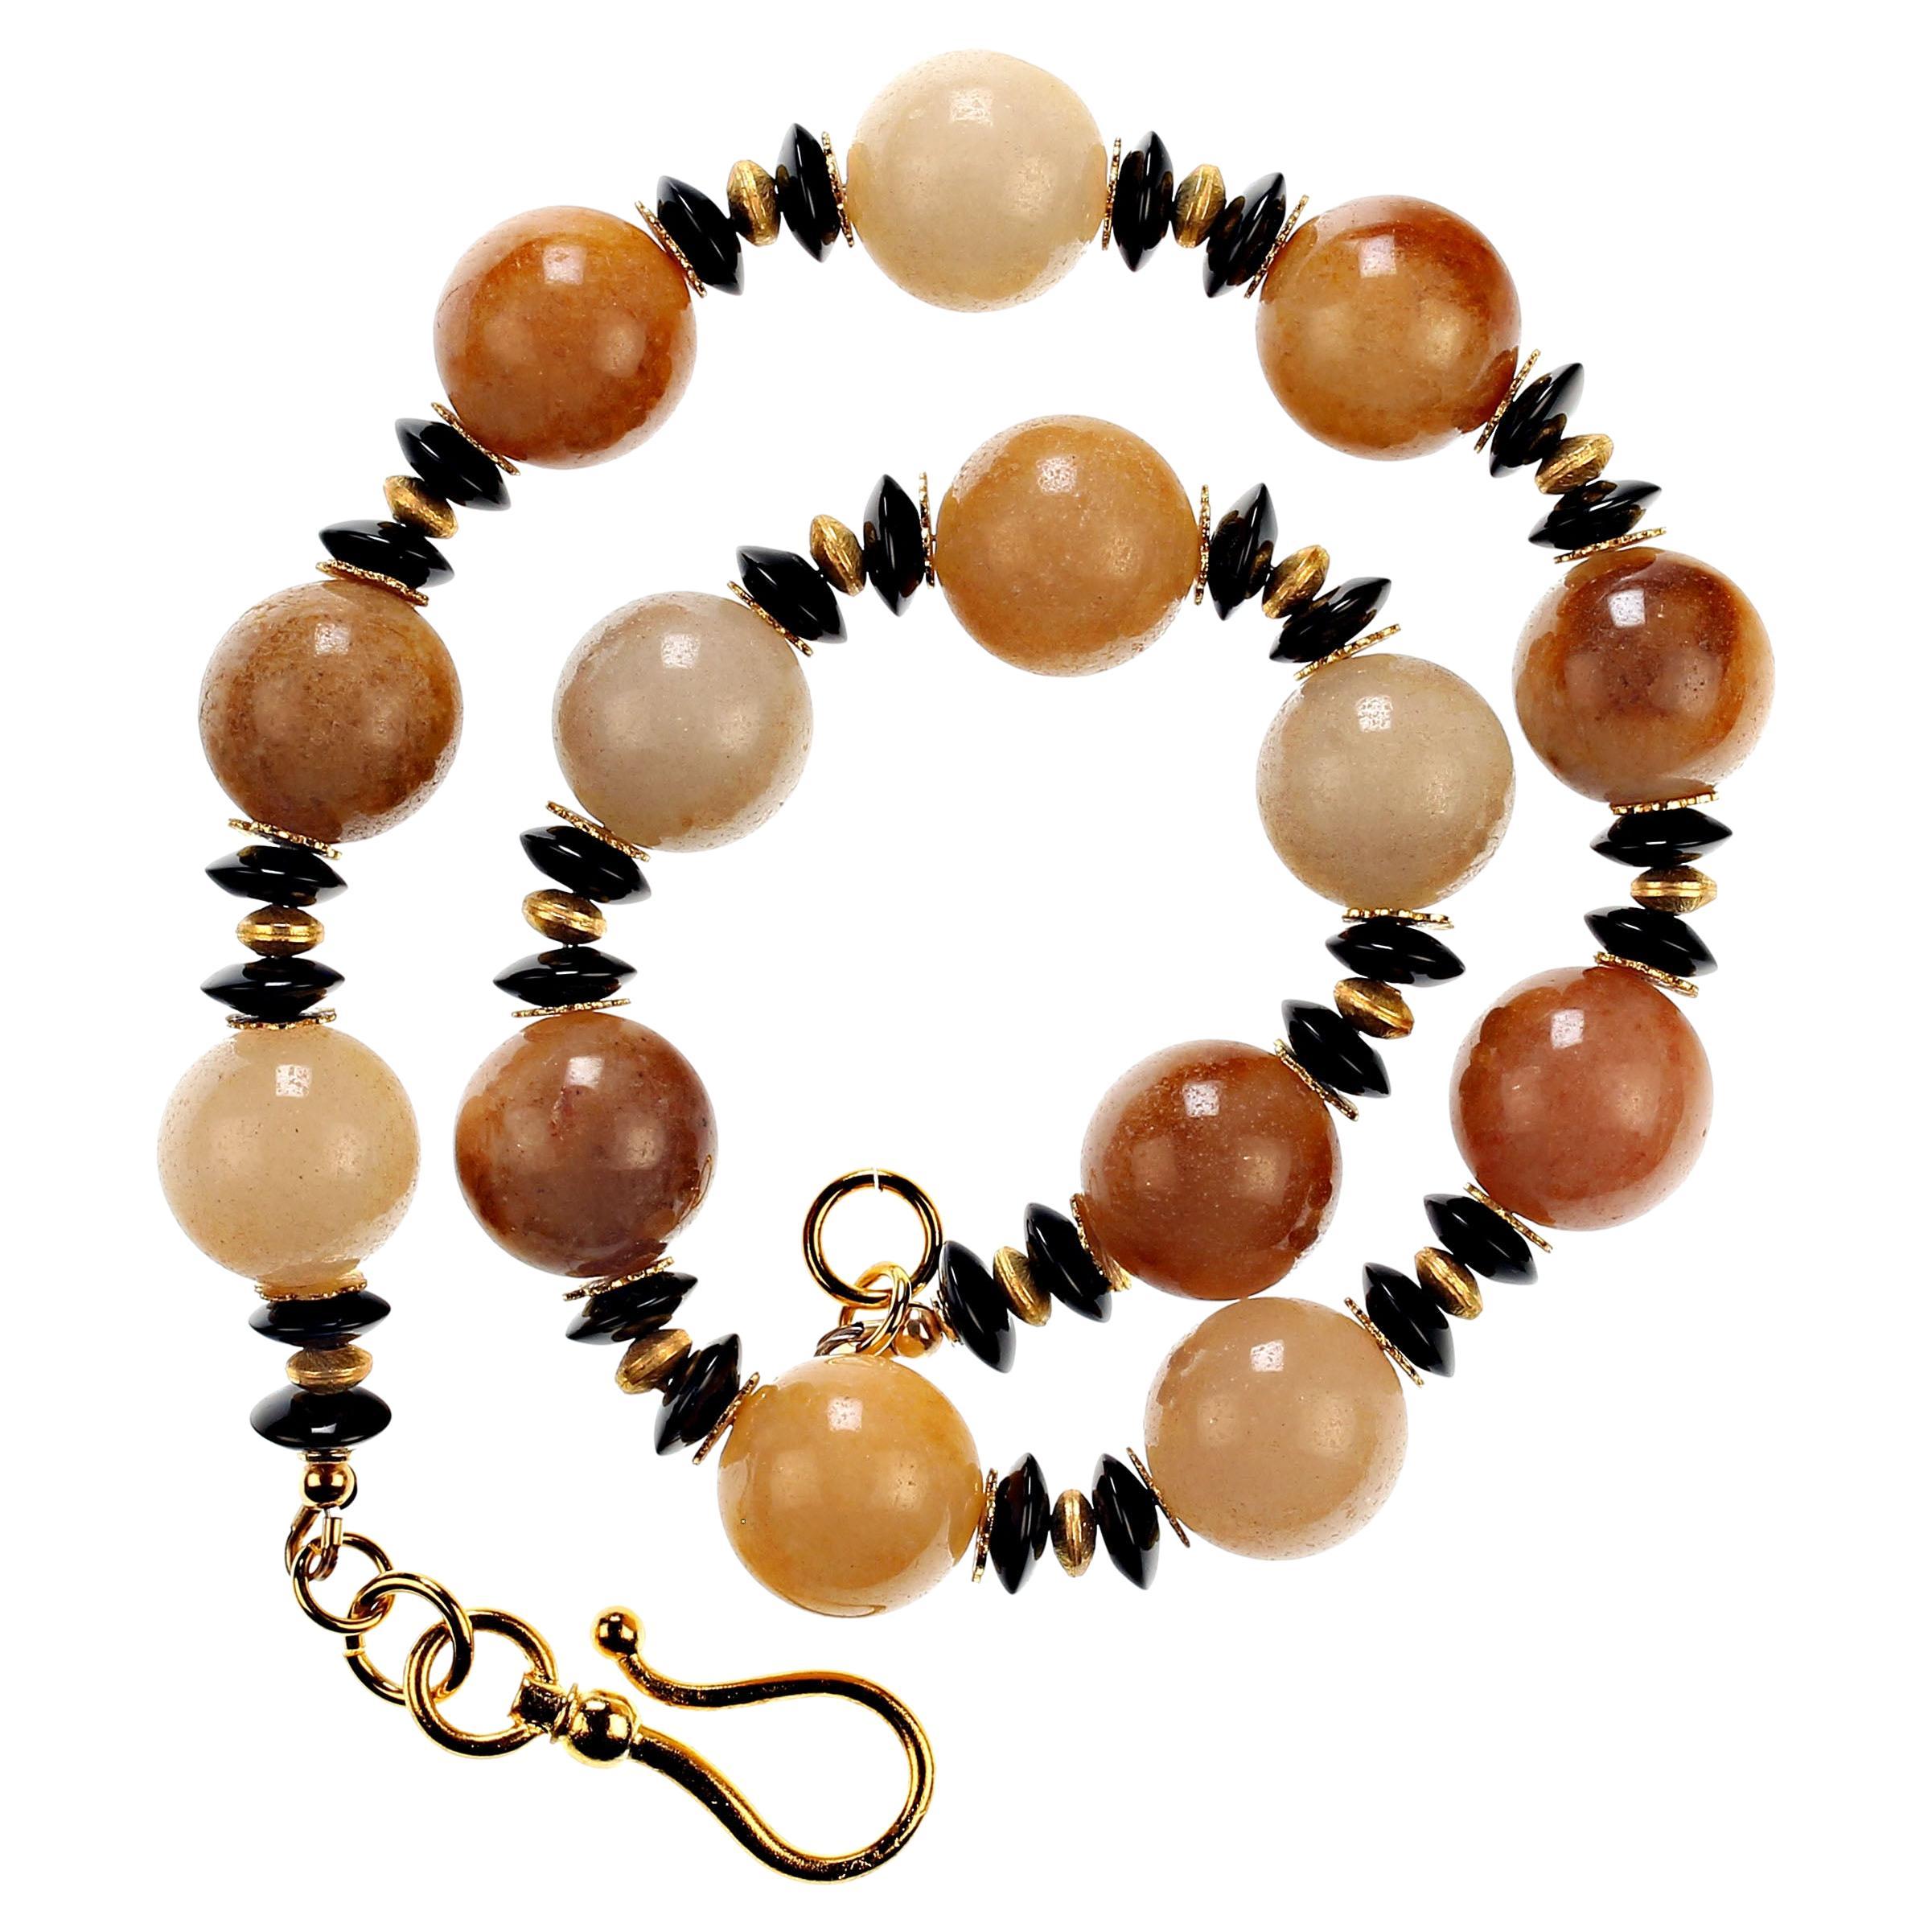 Gorgeous Large highly polished Golden Jade, 18 MM, accompanied with rondelles of glistening Black Tourmaline, 10 MM, and golden accents.  The Golden Jade is a wonderful variety of dyed warm shades that are enhanced by the highly polished Black